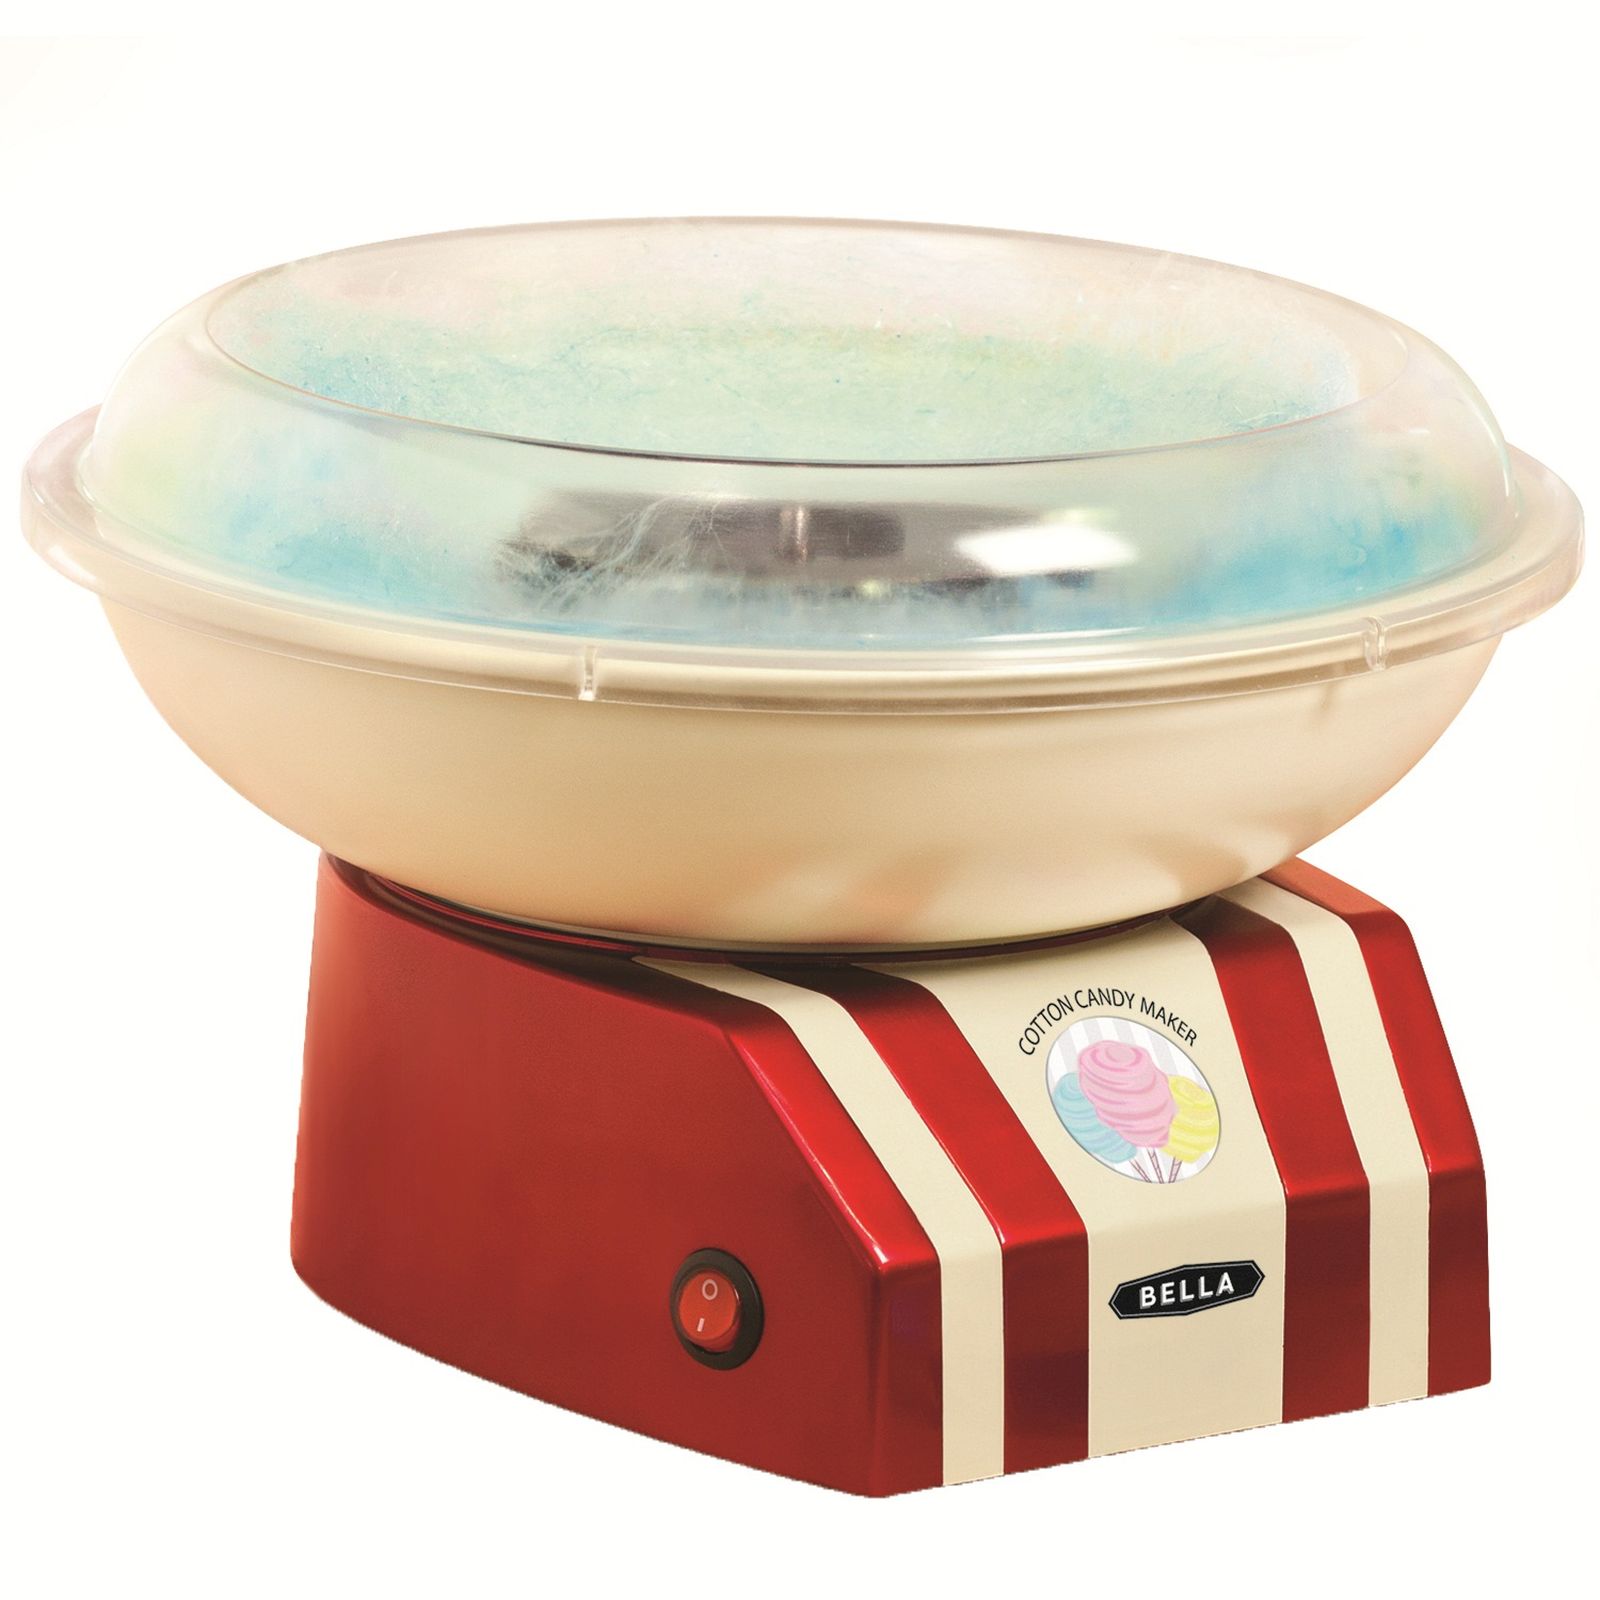 Cotton Candy Maker - Red/White